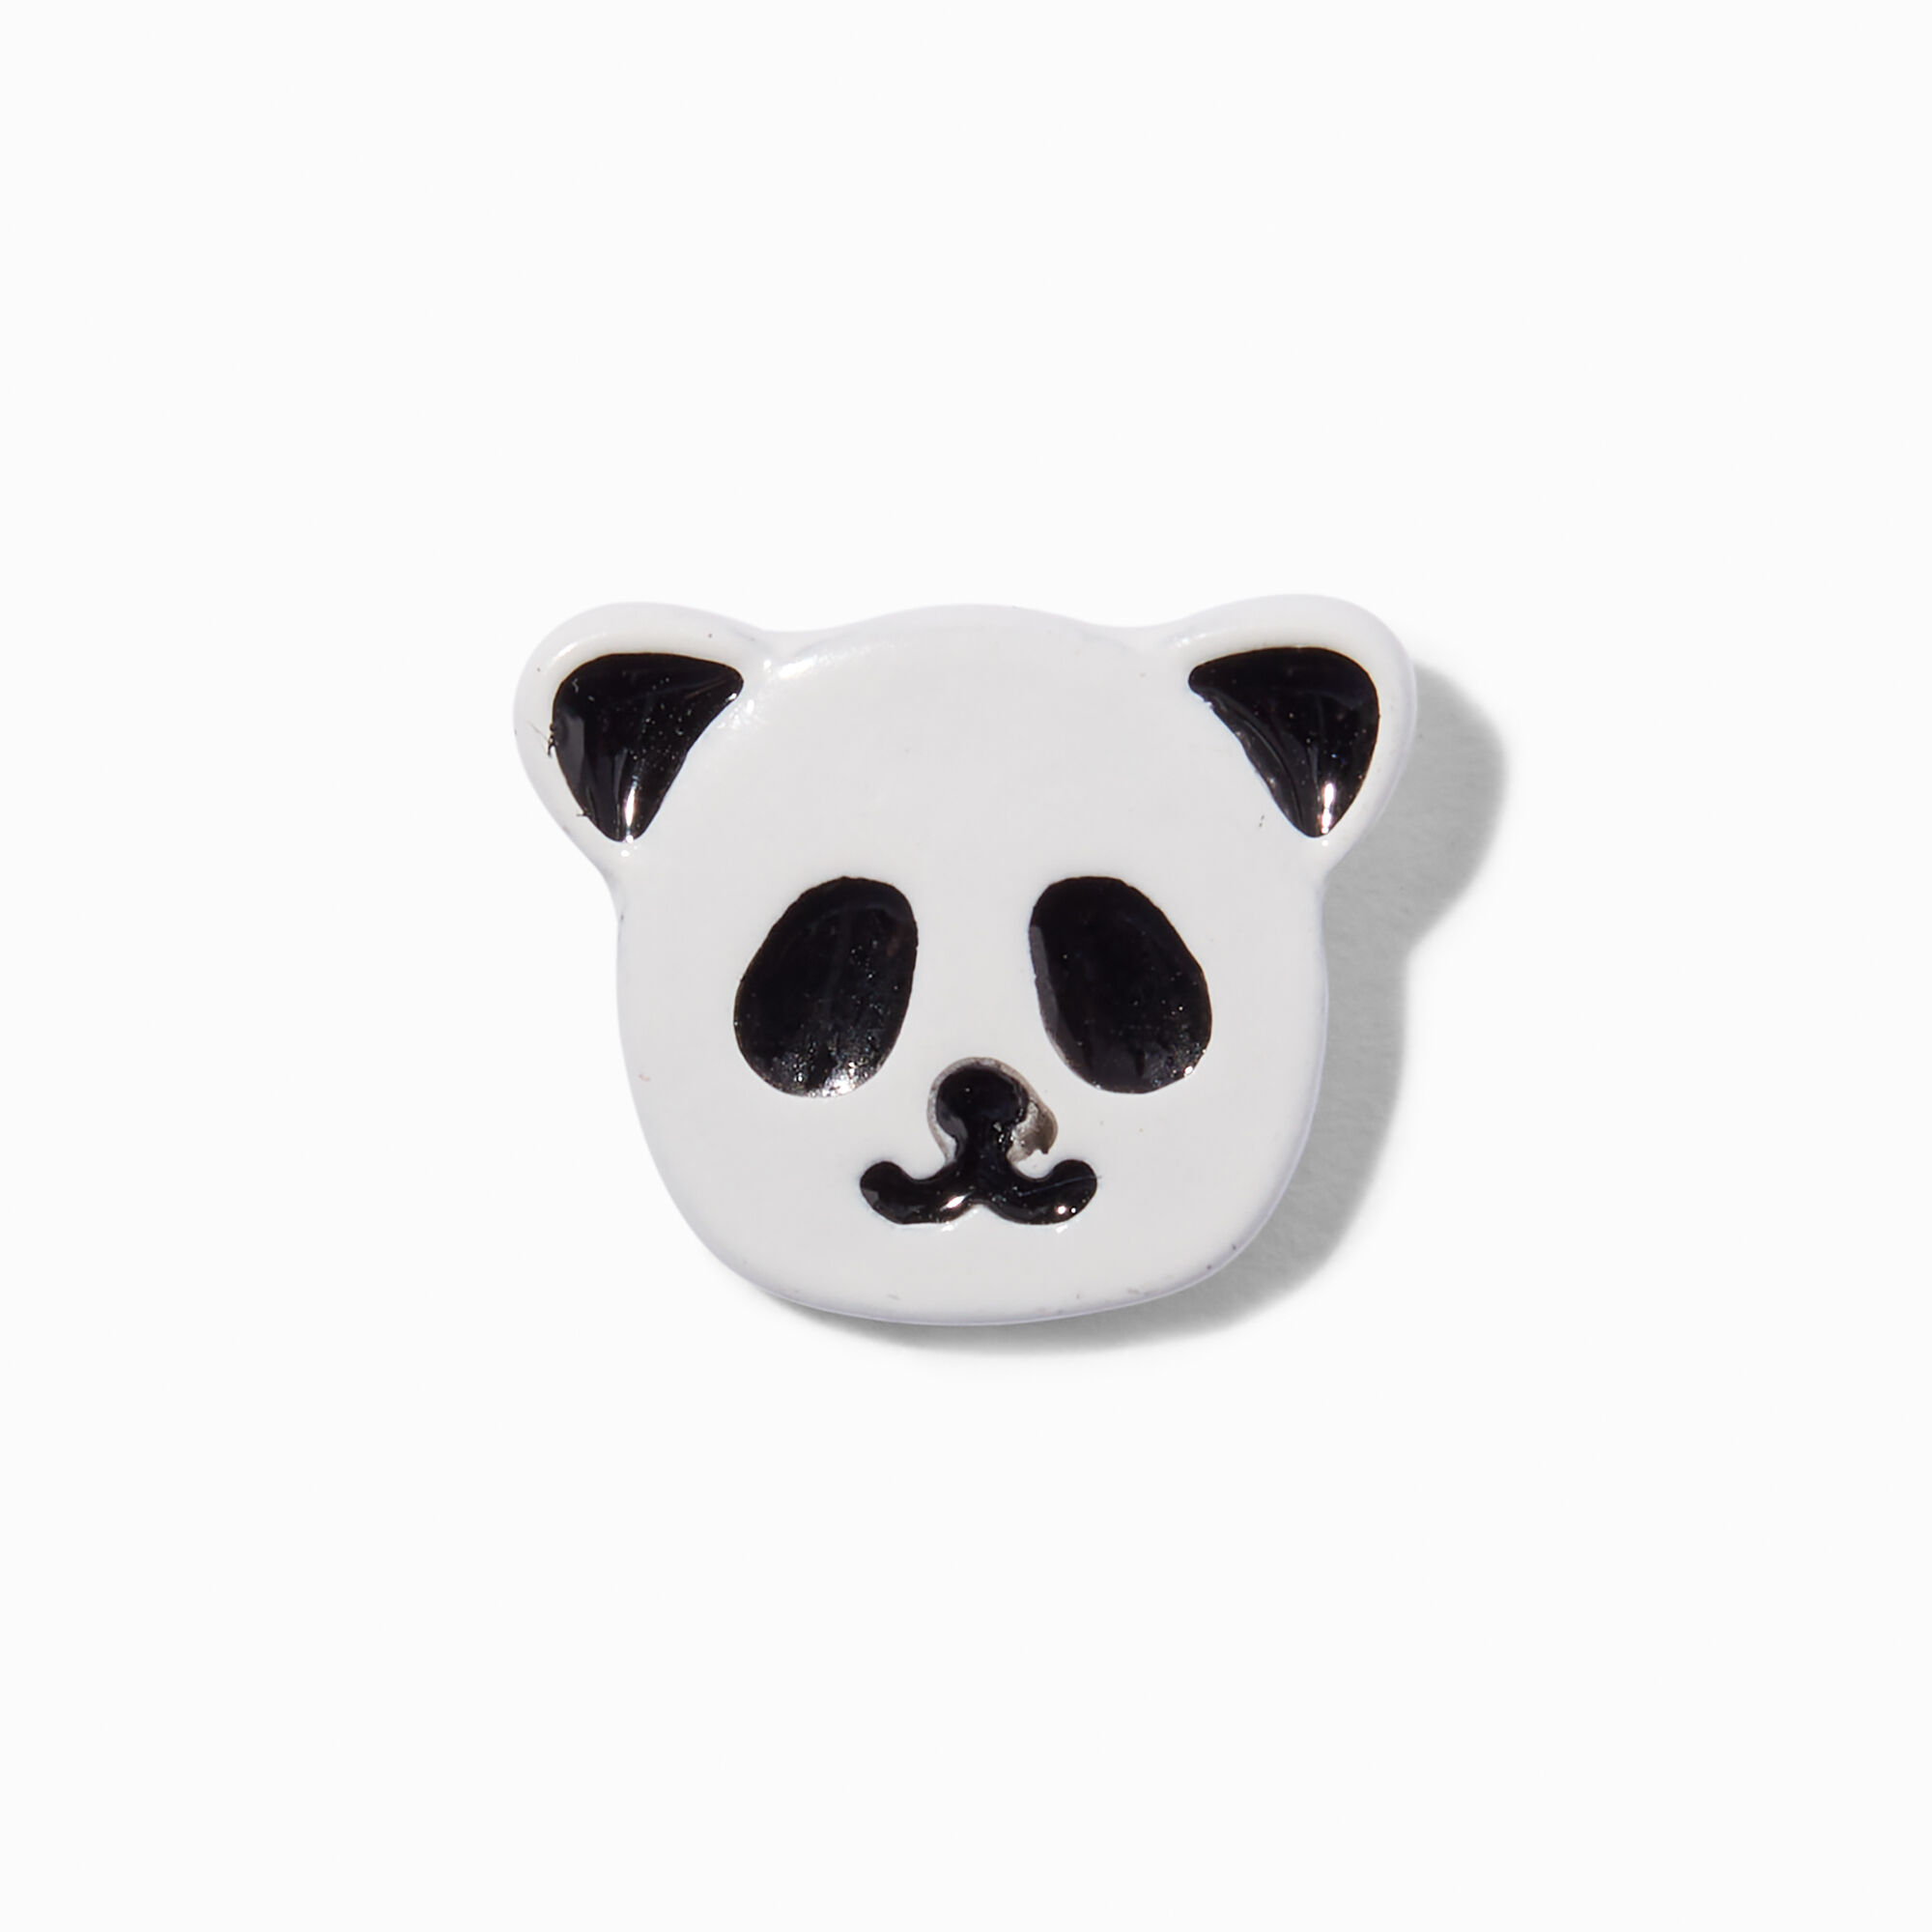 View Claires Panda Stud Earrings White information